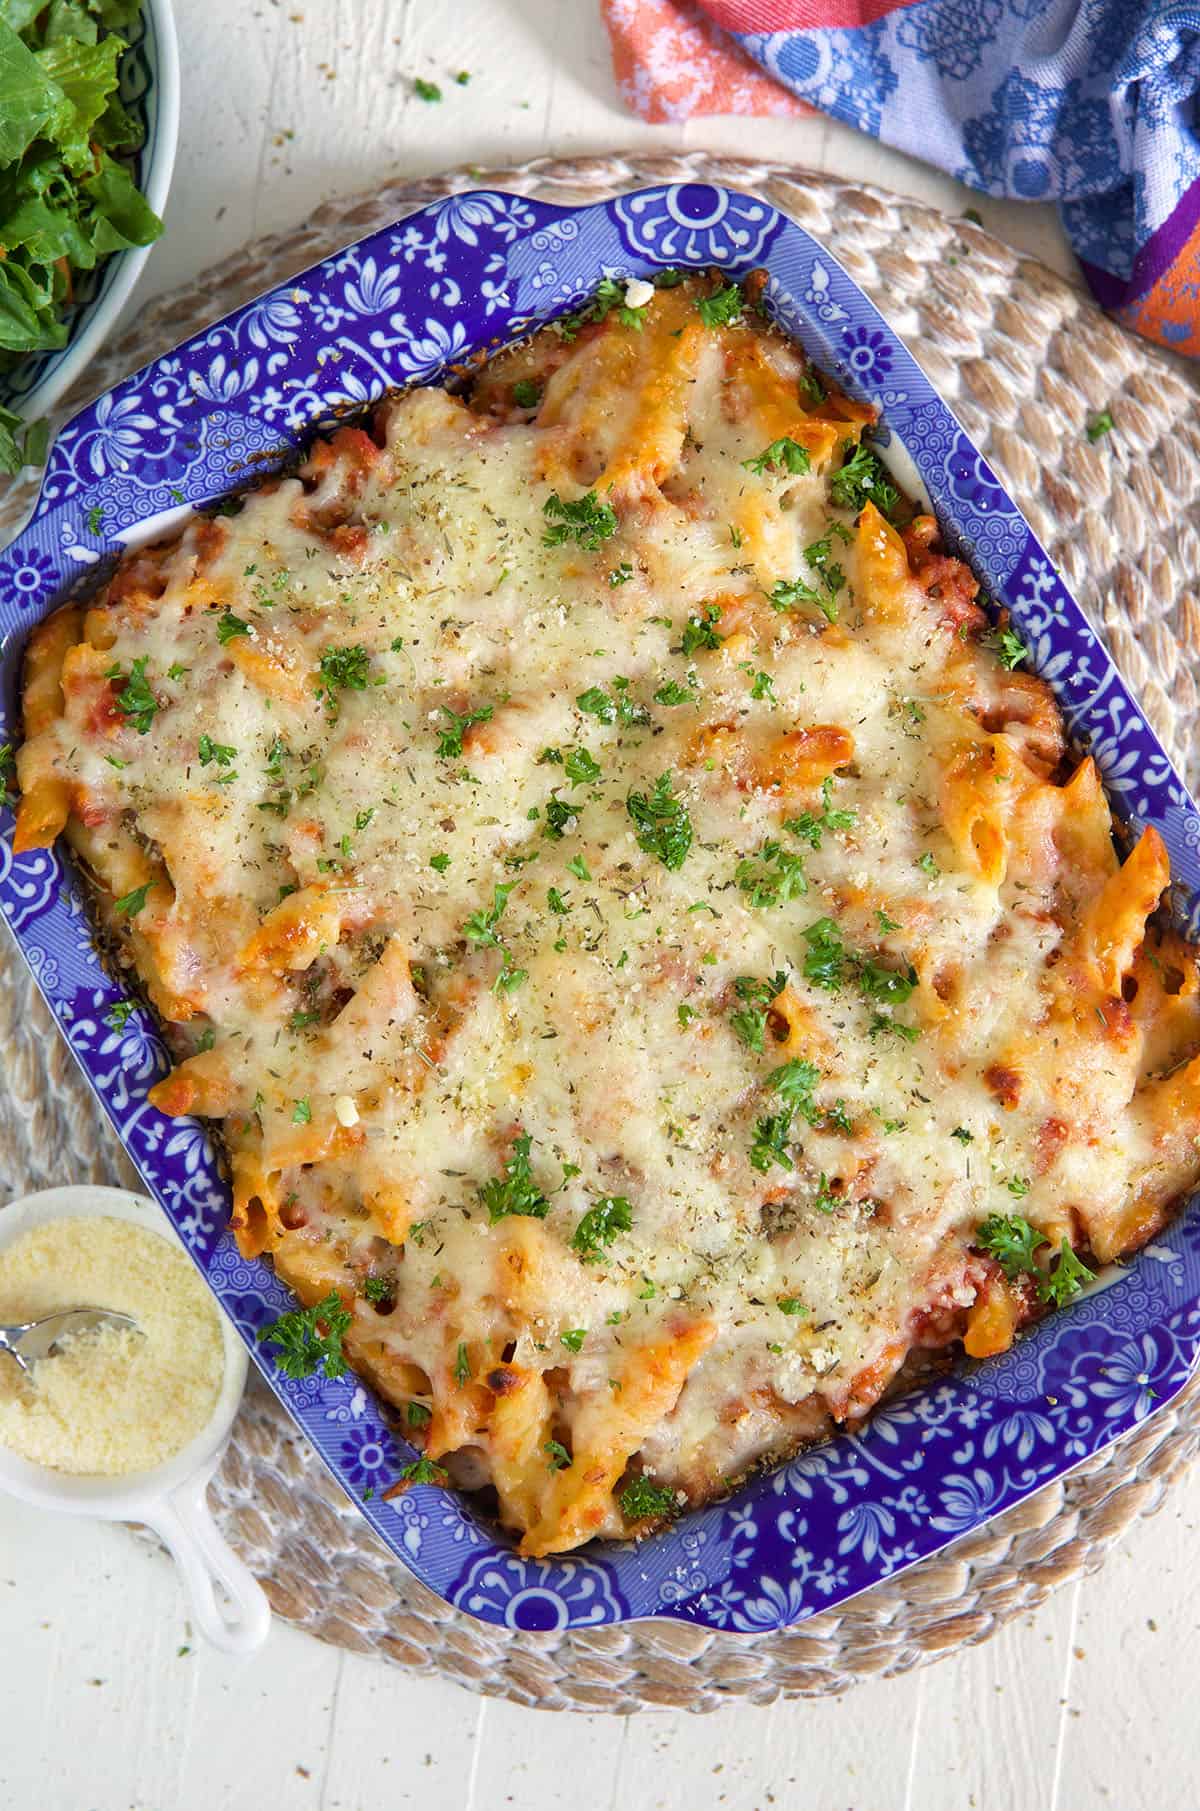 Mostaccioli is baked to perfection and garnished with a sprinkle of fresh parsley.